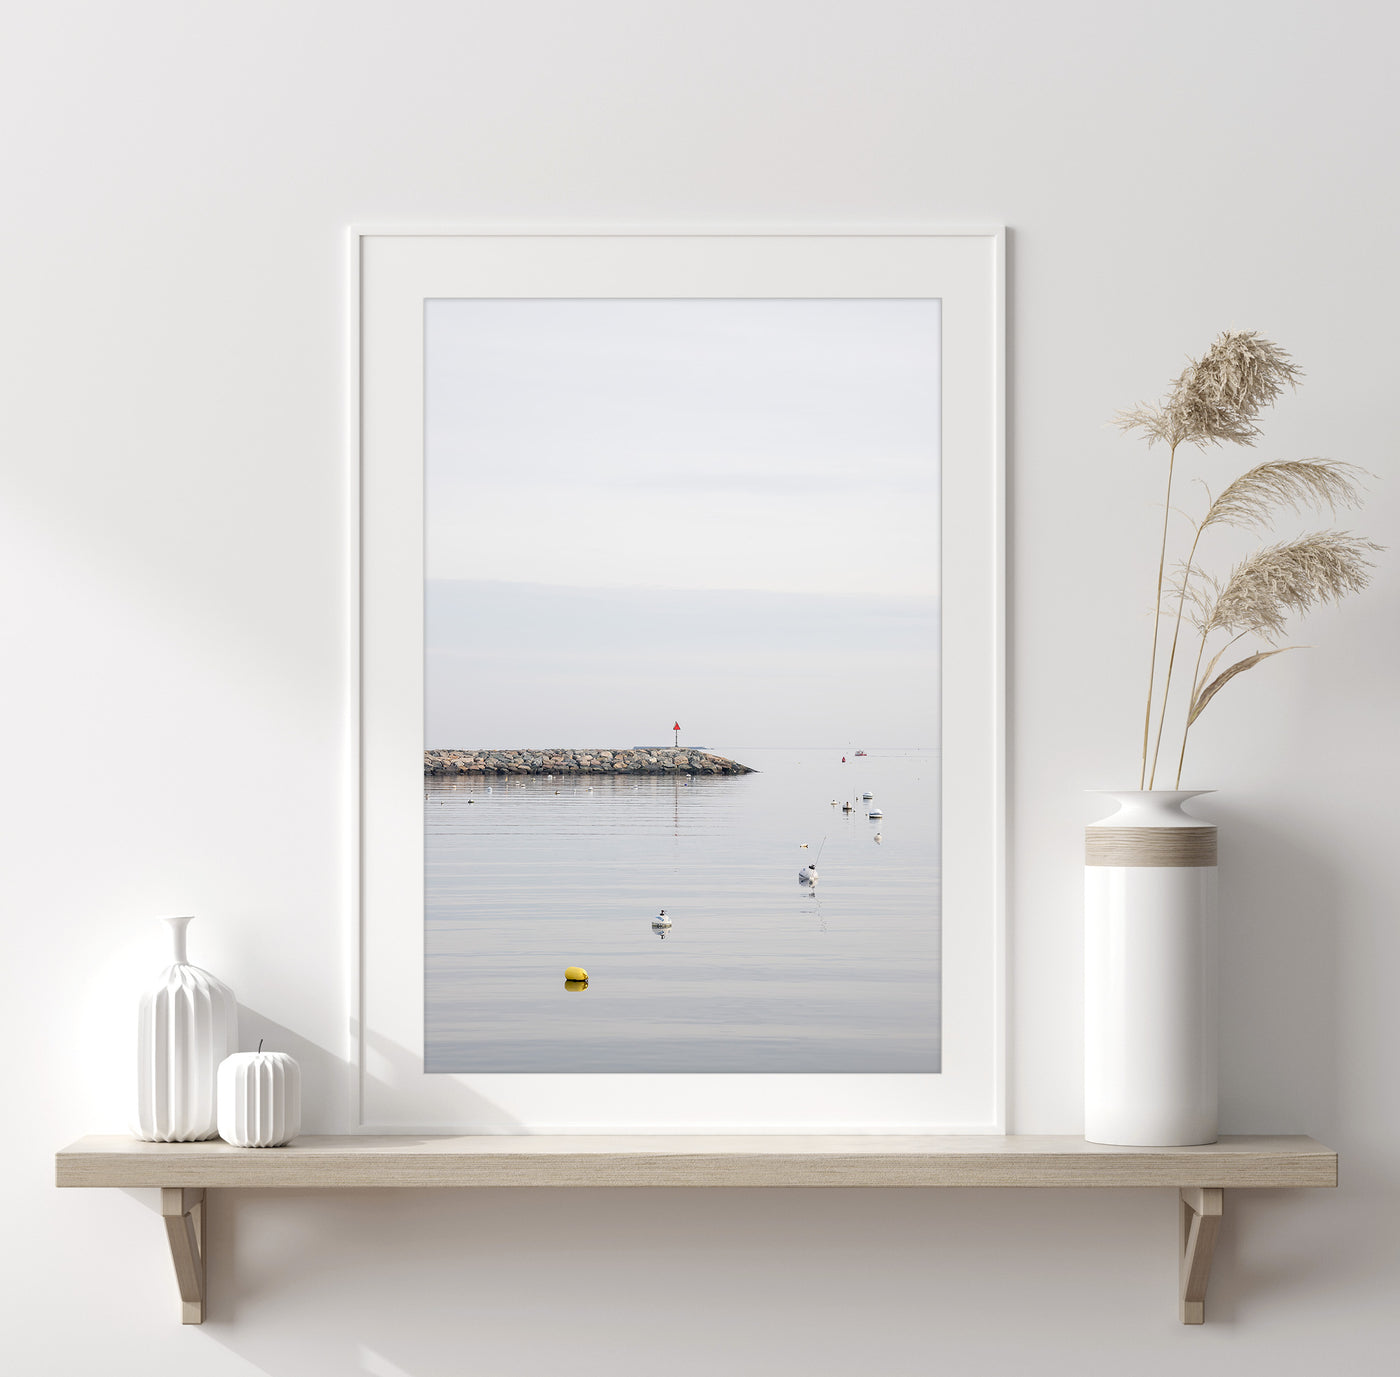 Calm Water - Art print by Cattie Coyle Photography on shelf